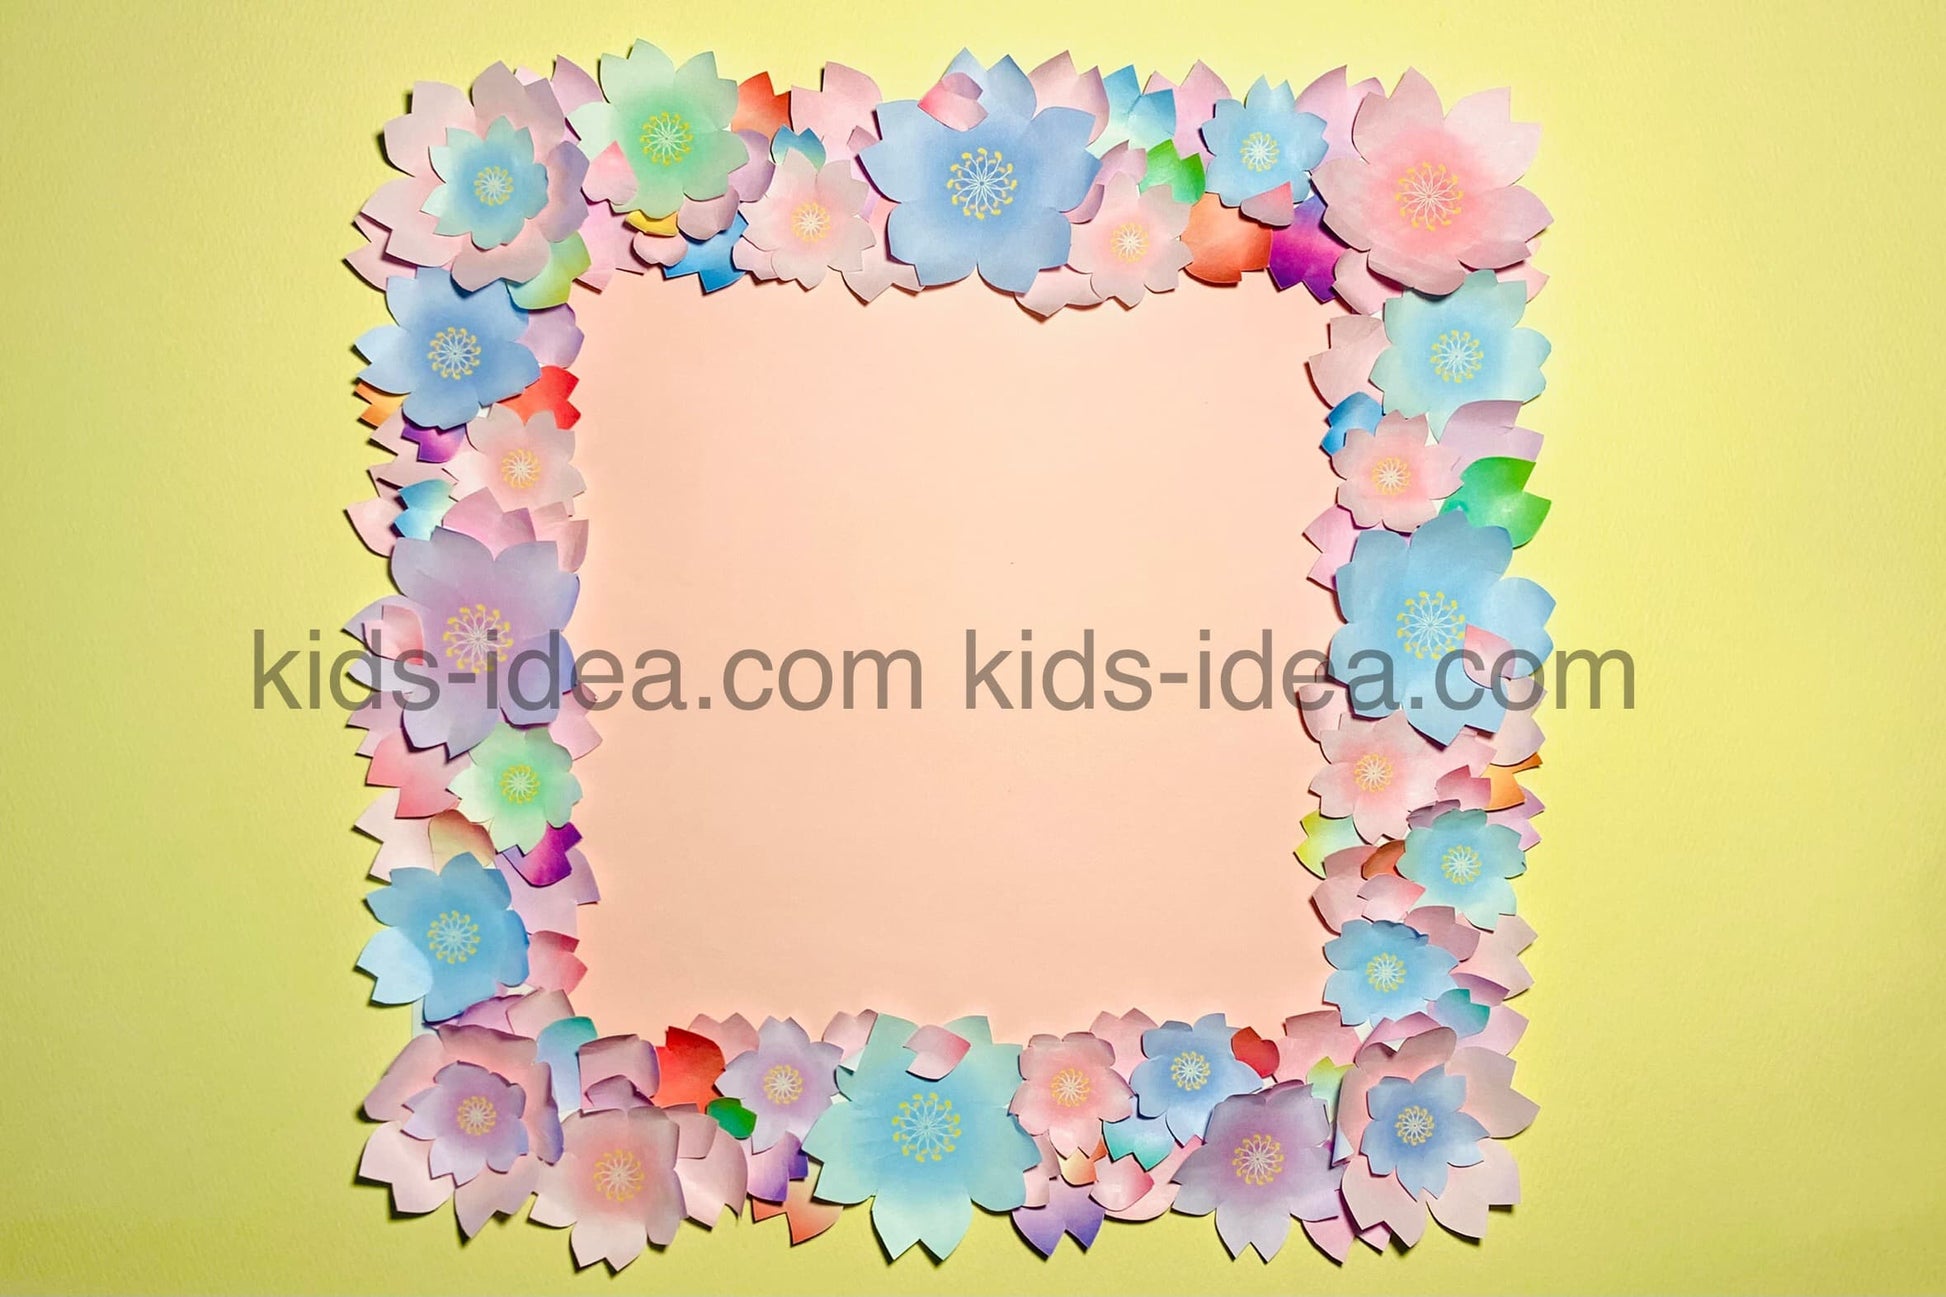 Sample of picture frame made with cherry blossom 01 pattern